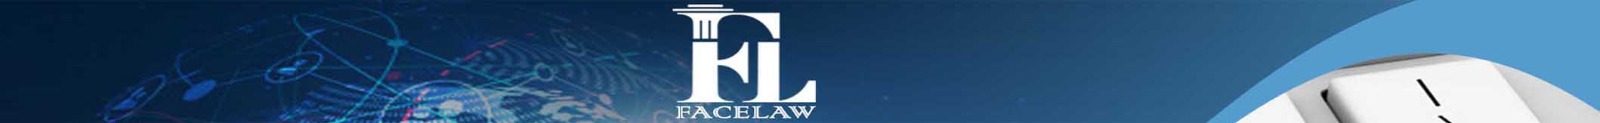 california immigration lawyer